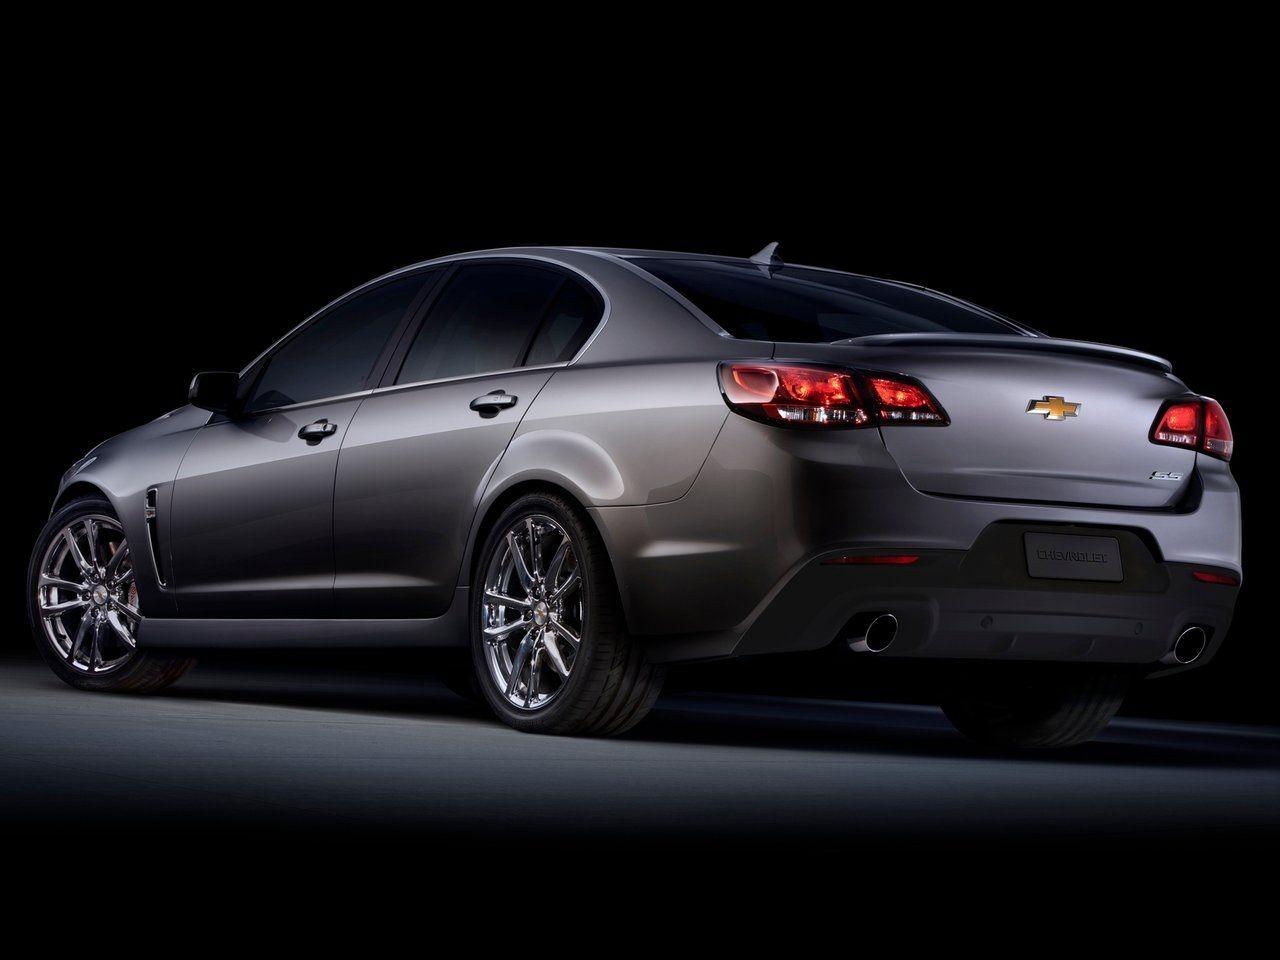 Chevrolet SS, Picture, Pics, Photo, Image